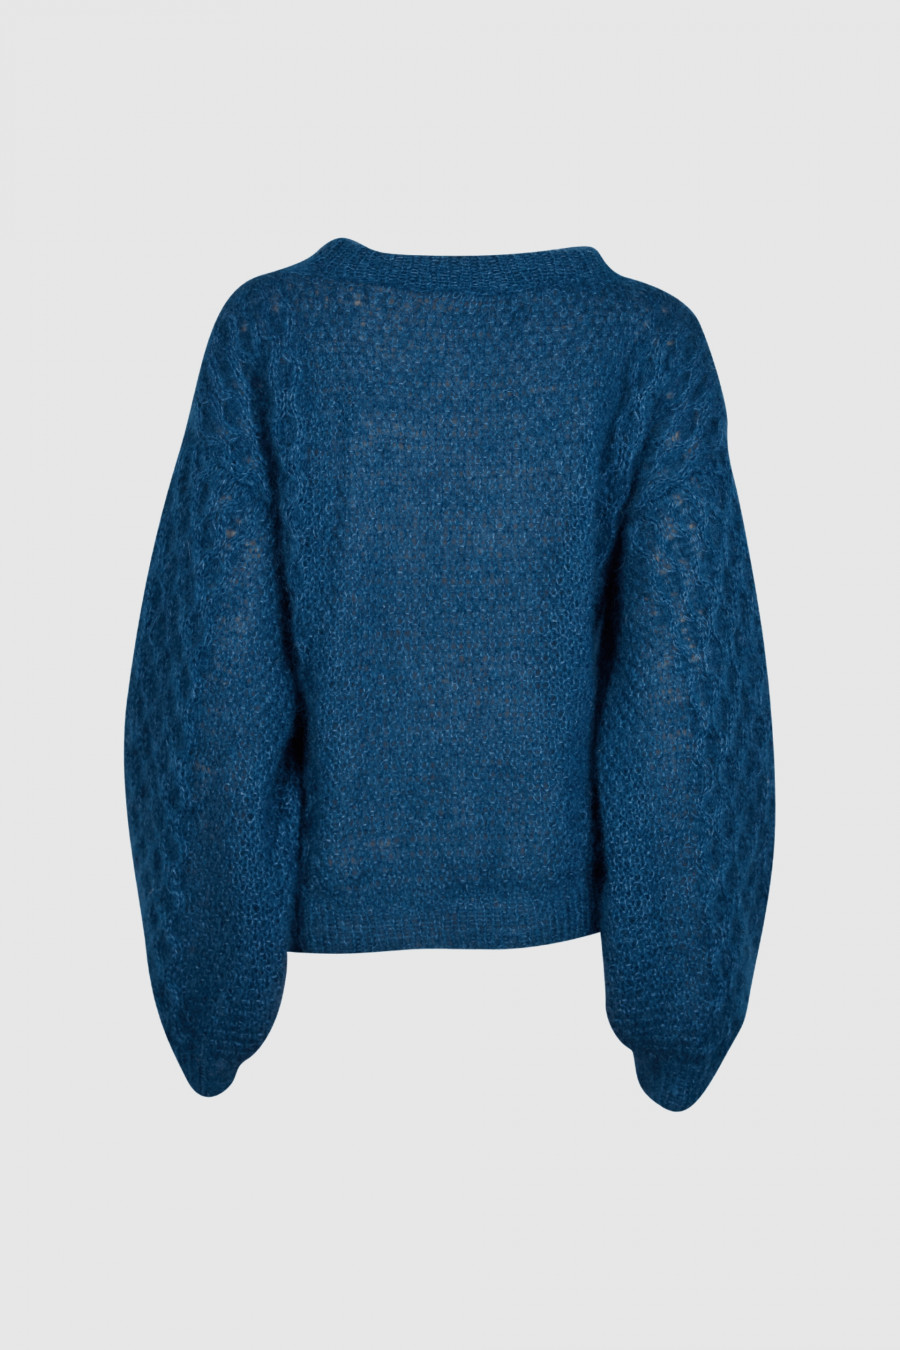 Hand knit mohair and silk sweater in Petrol